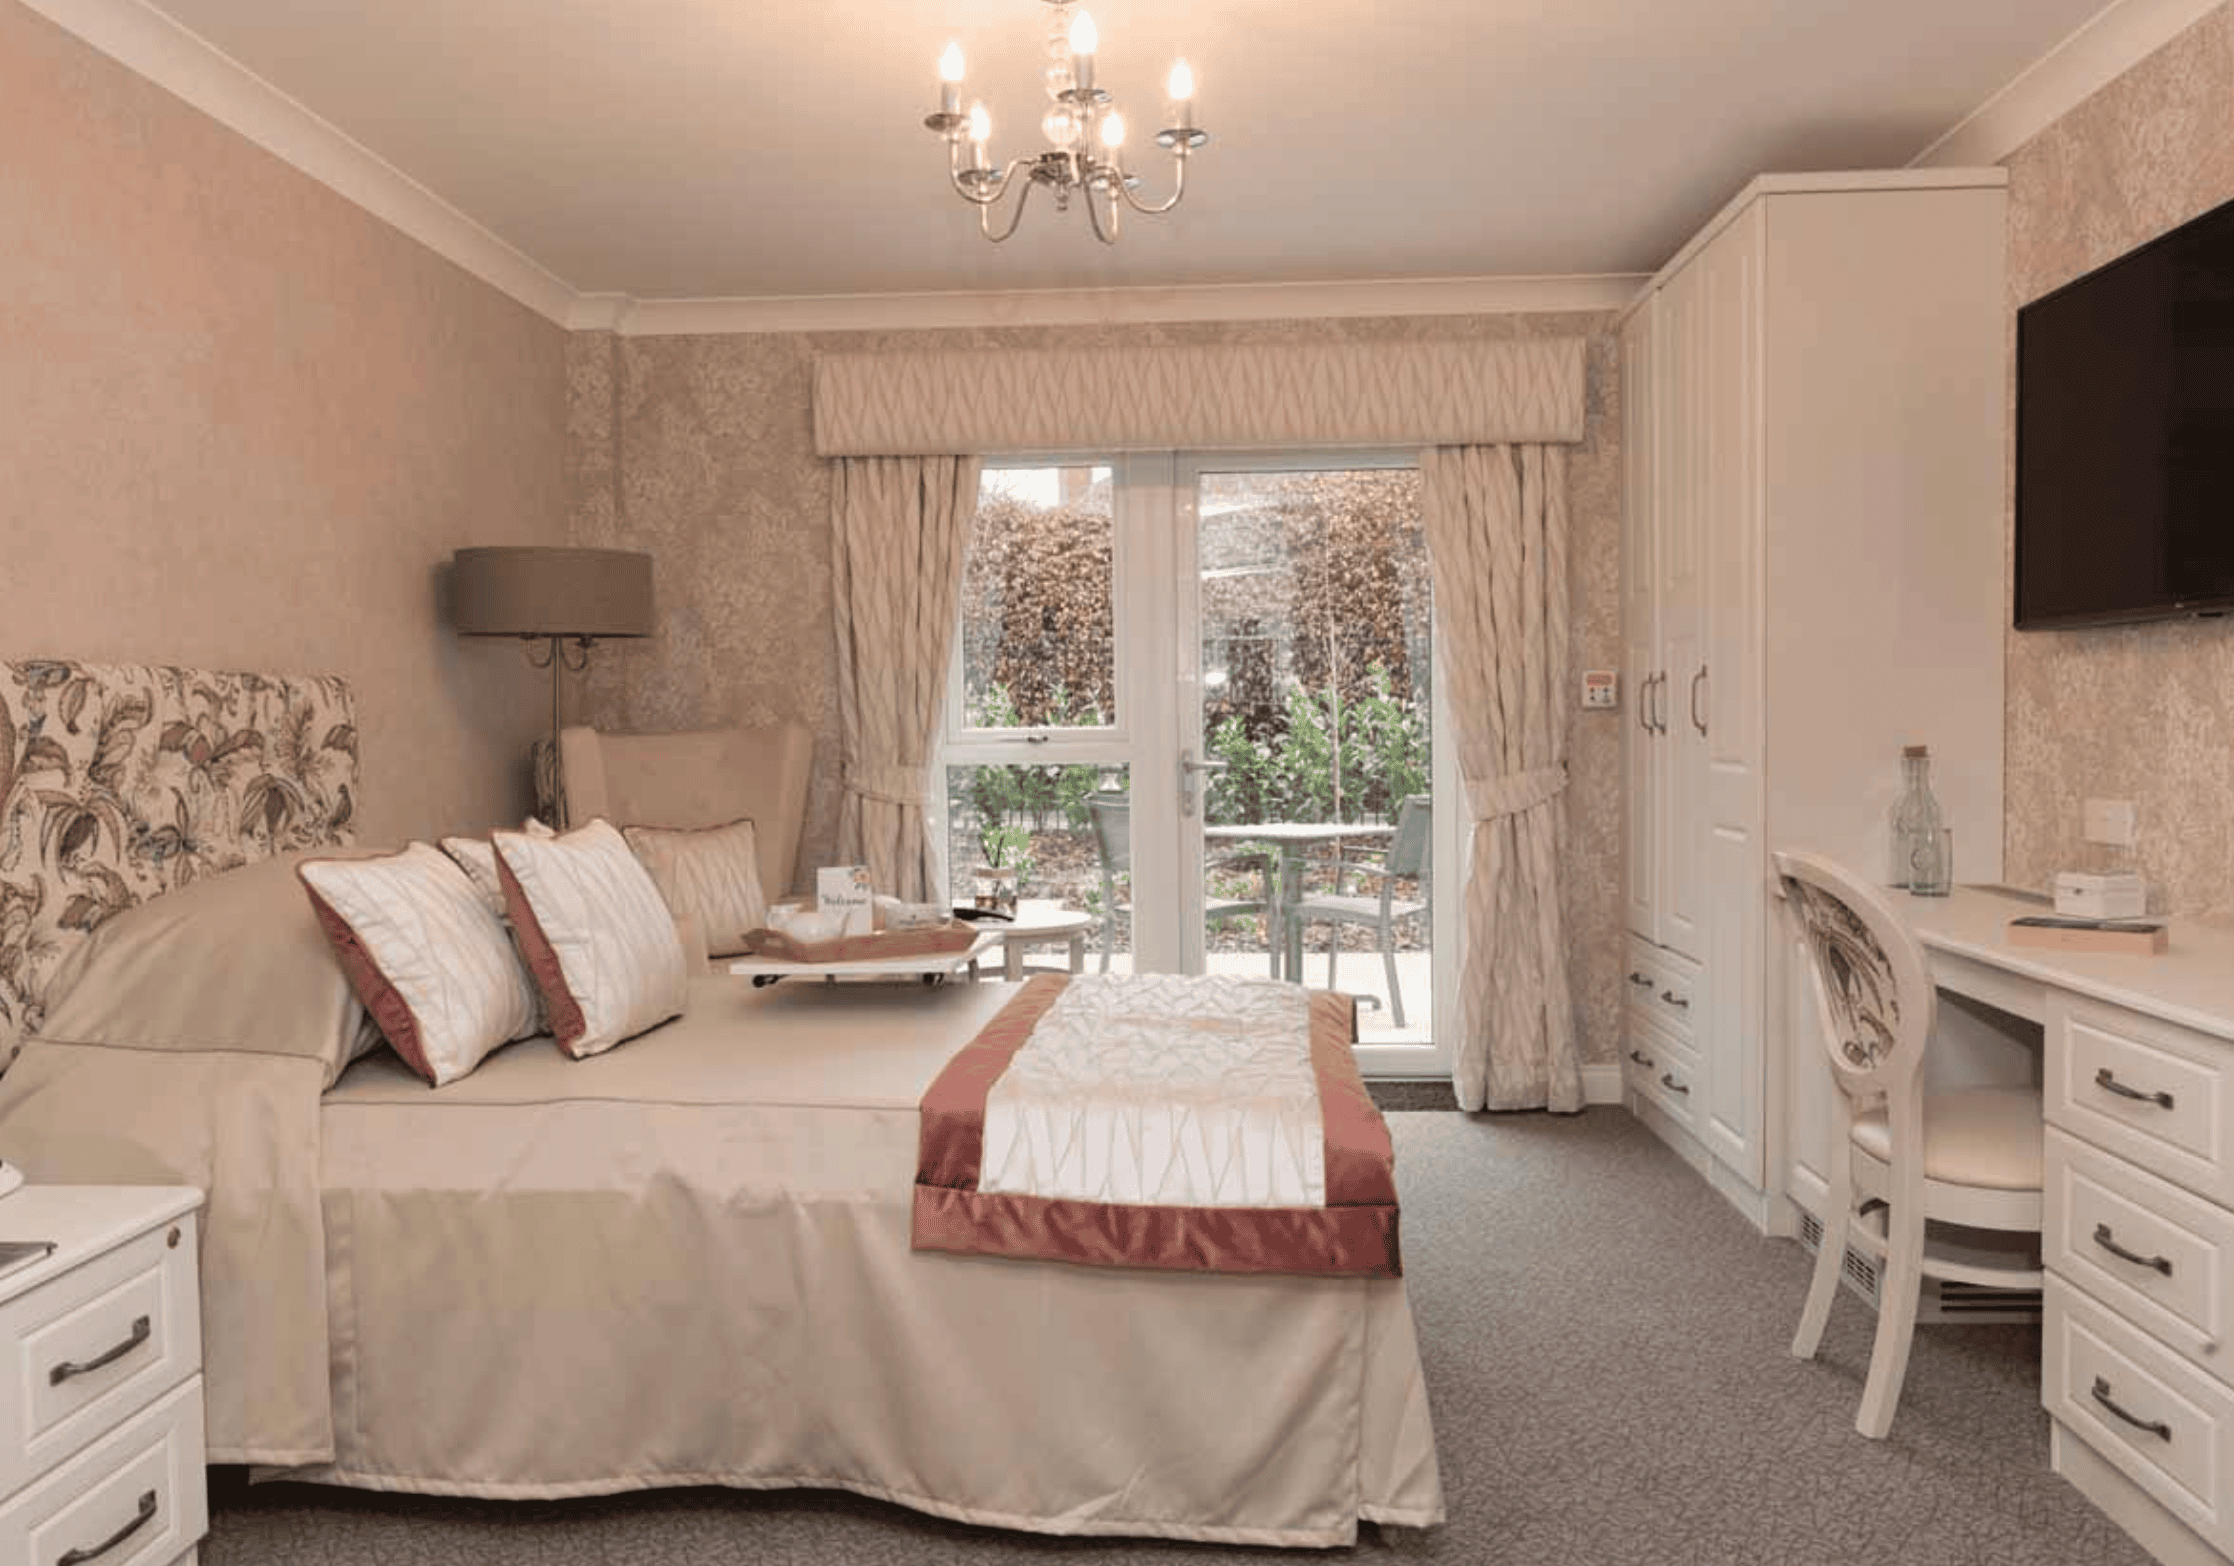 Bedroom of Benson House Care Home in Wallingford, South Oxfordshire